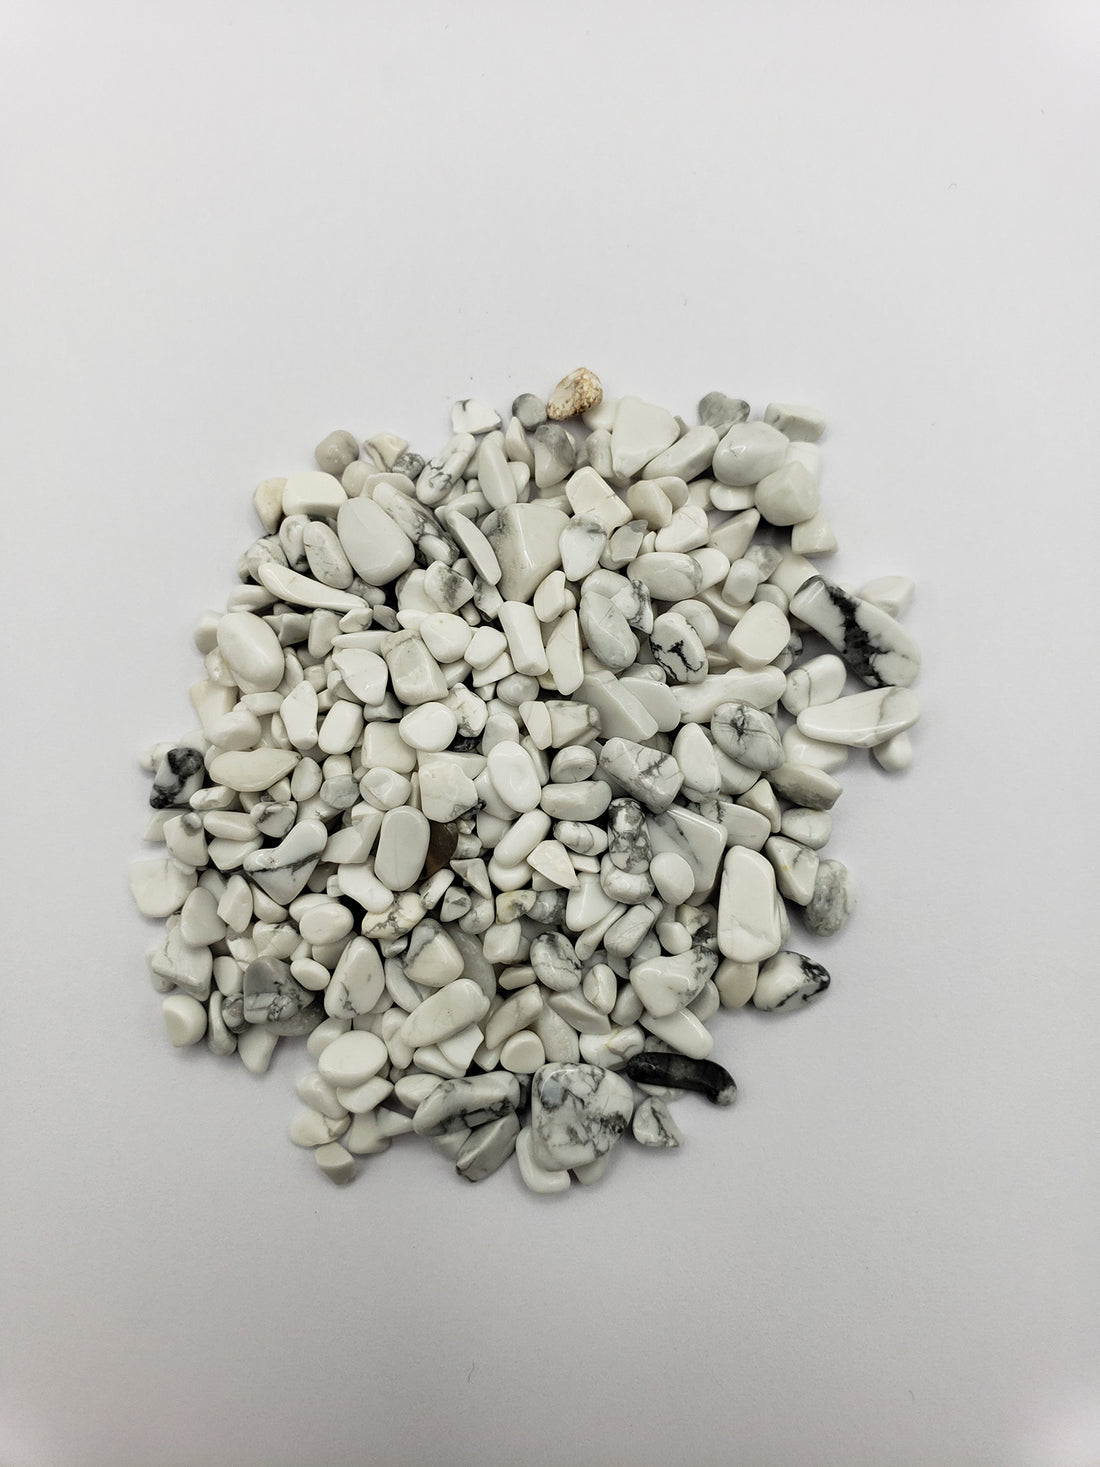 One ounce of howlite crystal chips on white background